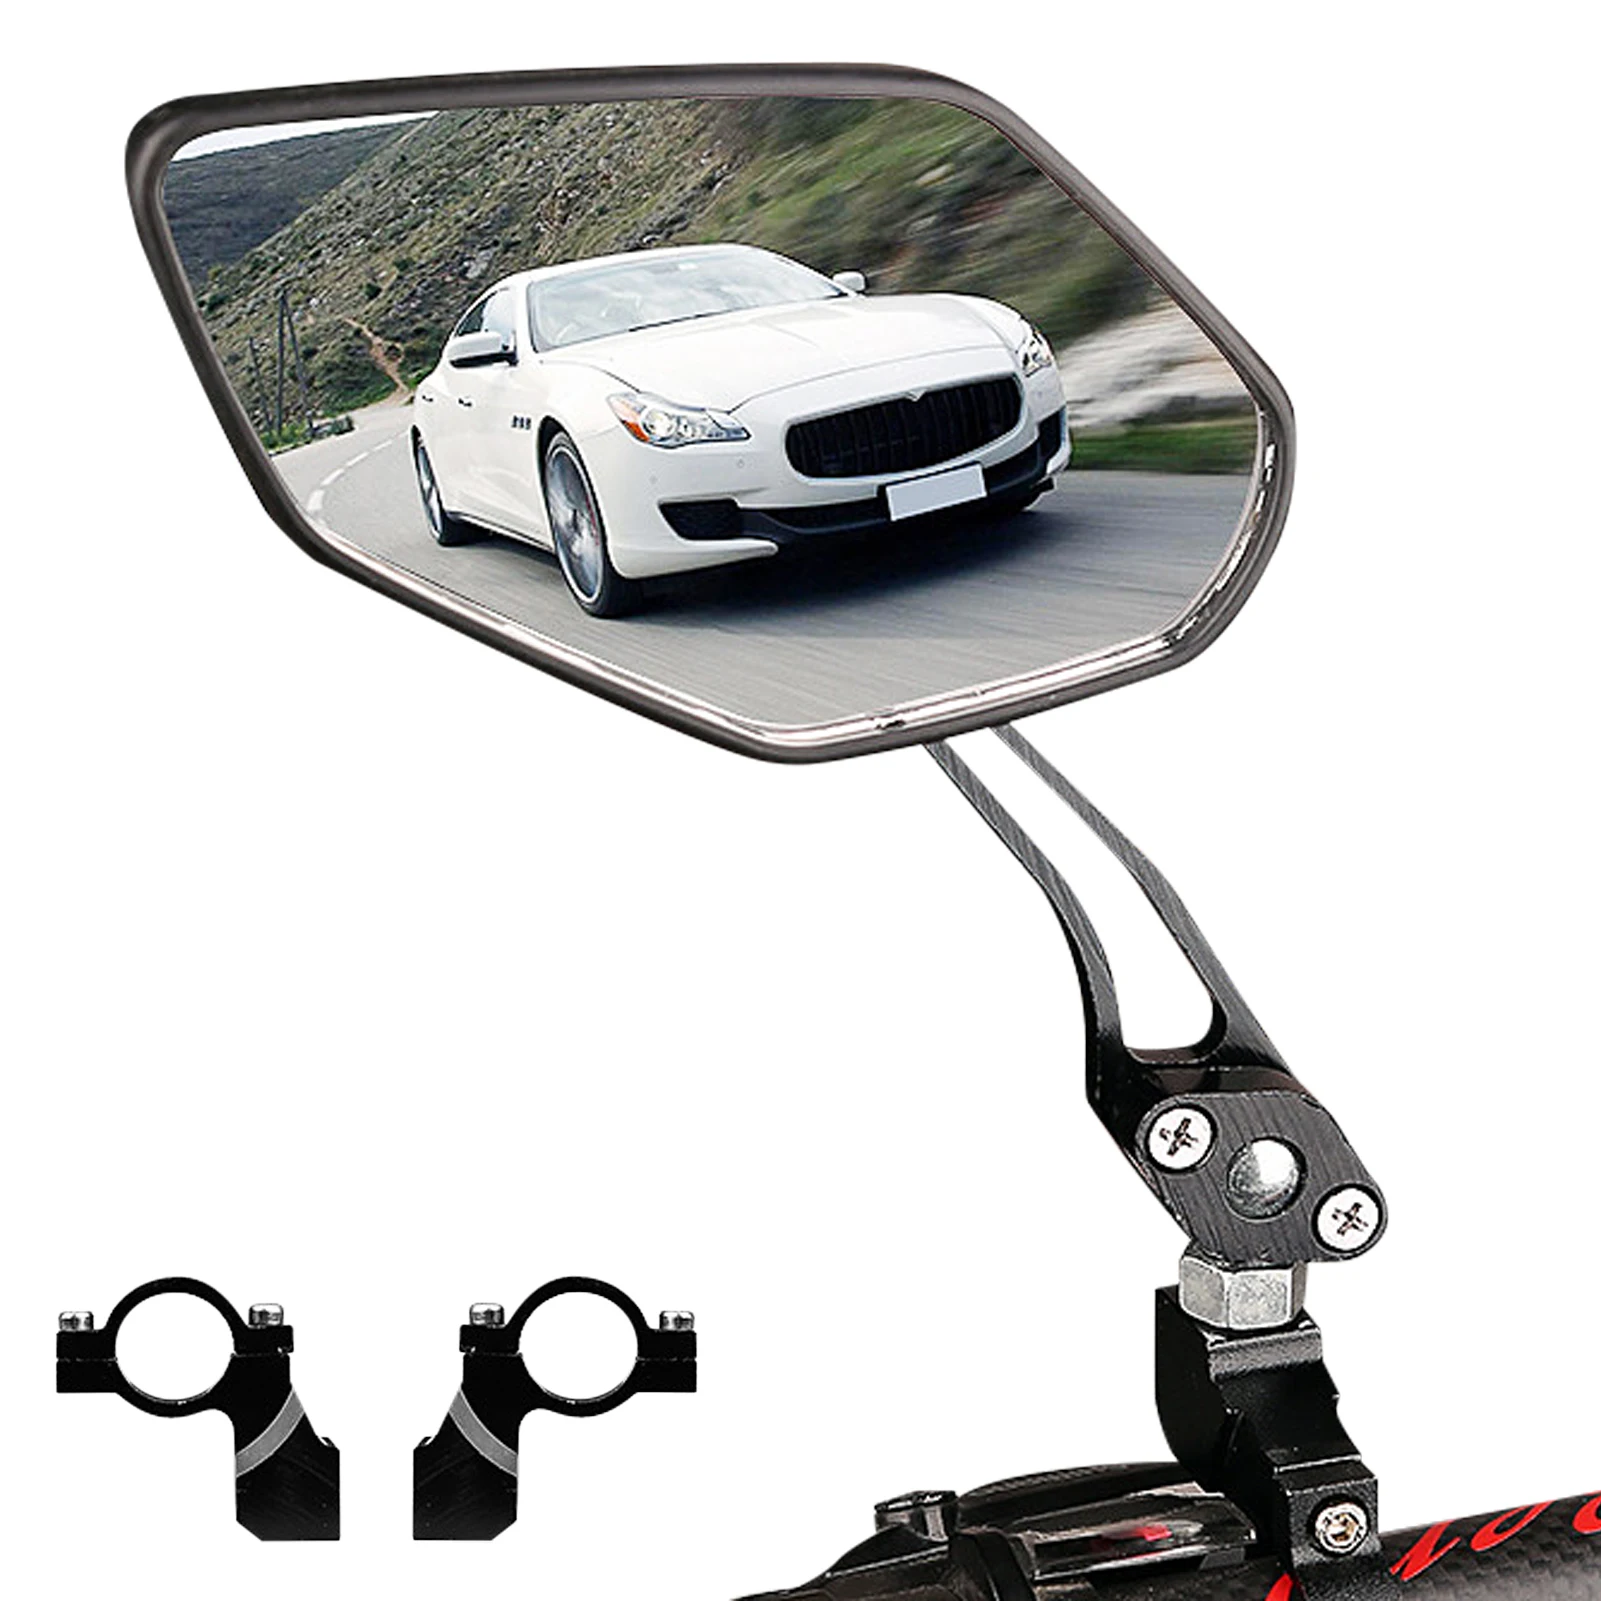 

1 Pair Bicycle Rear View Mirror Rotatable Mountain Bike Mirrors Shatterproof Bike Glass Mirrors Easy To Install Wide Angle